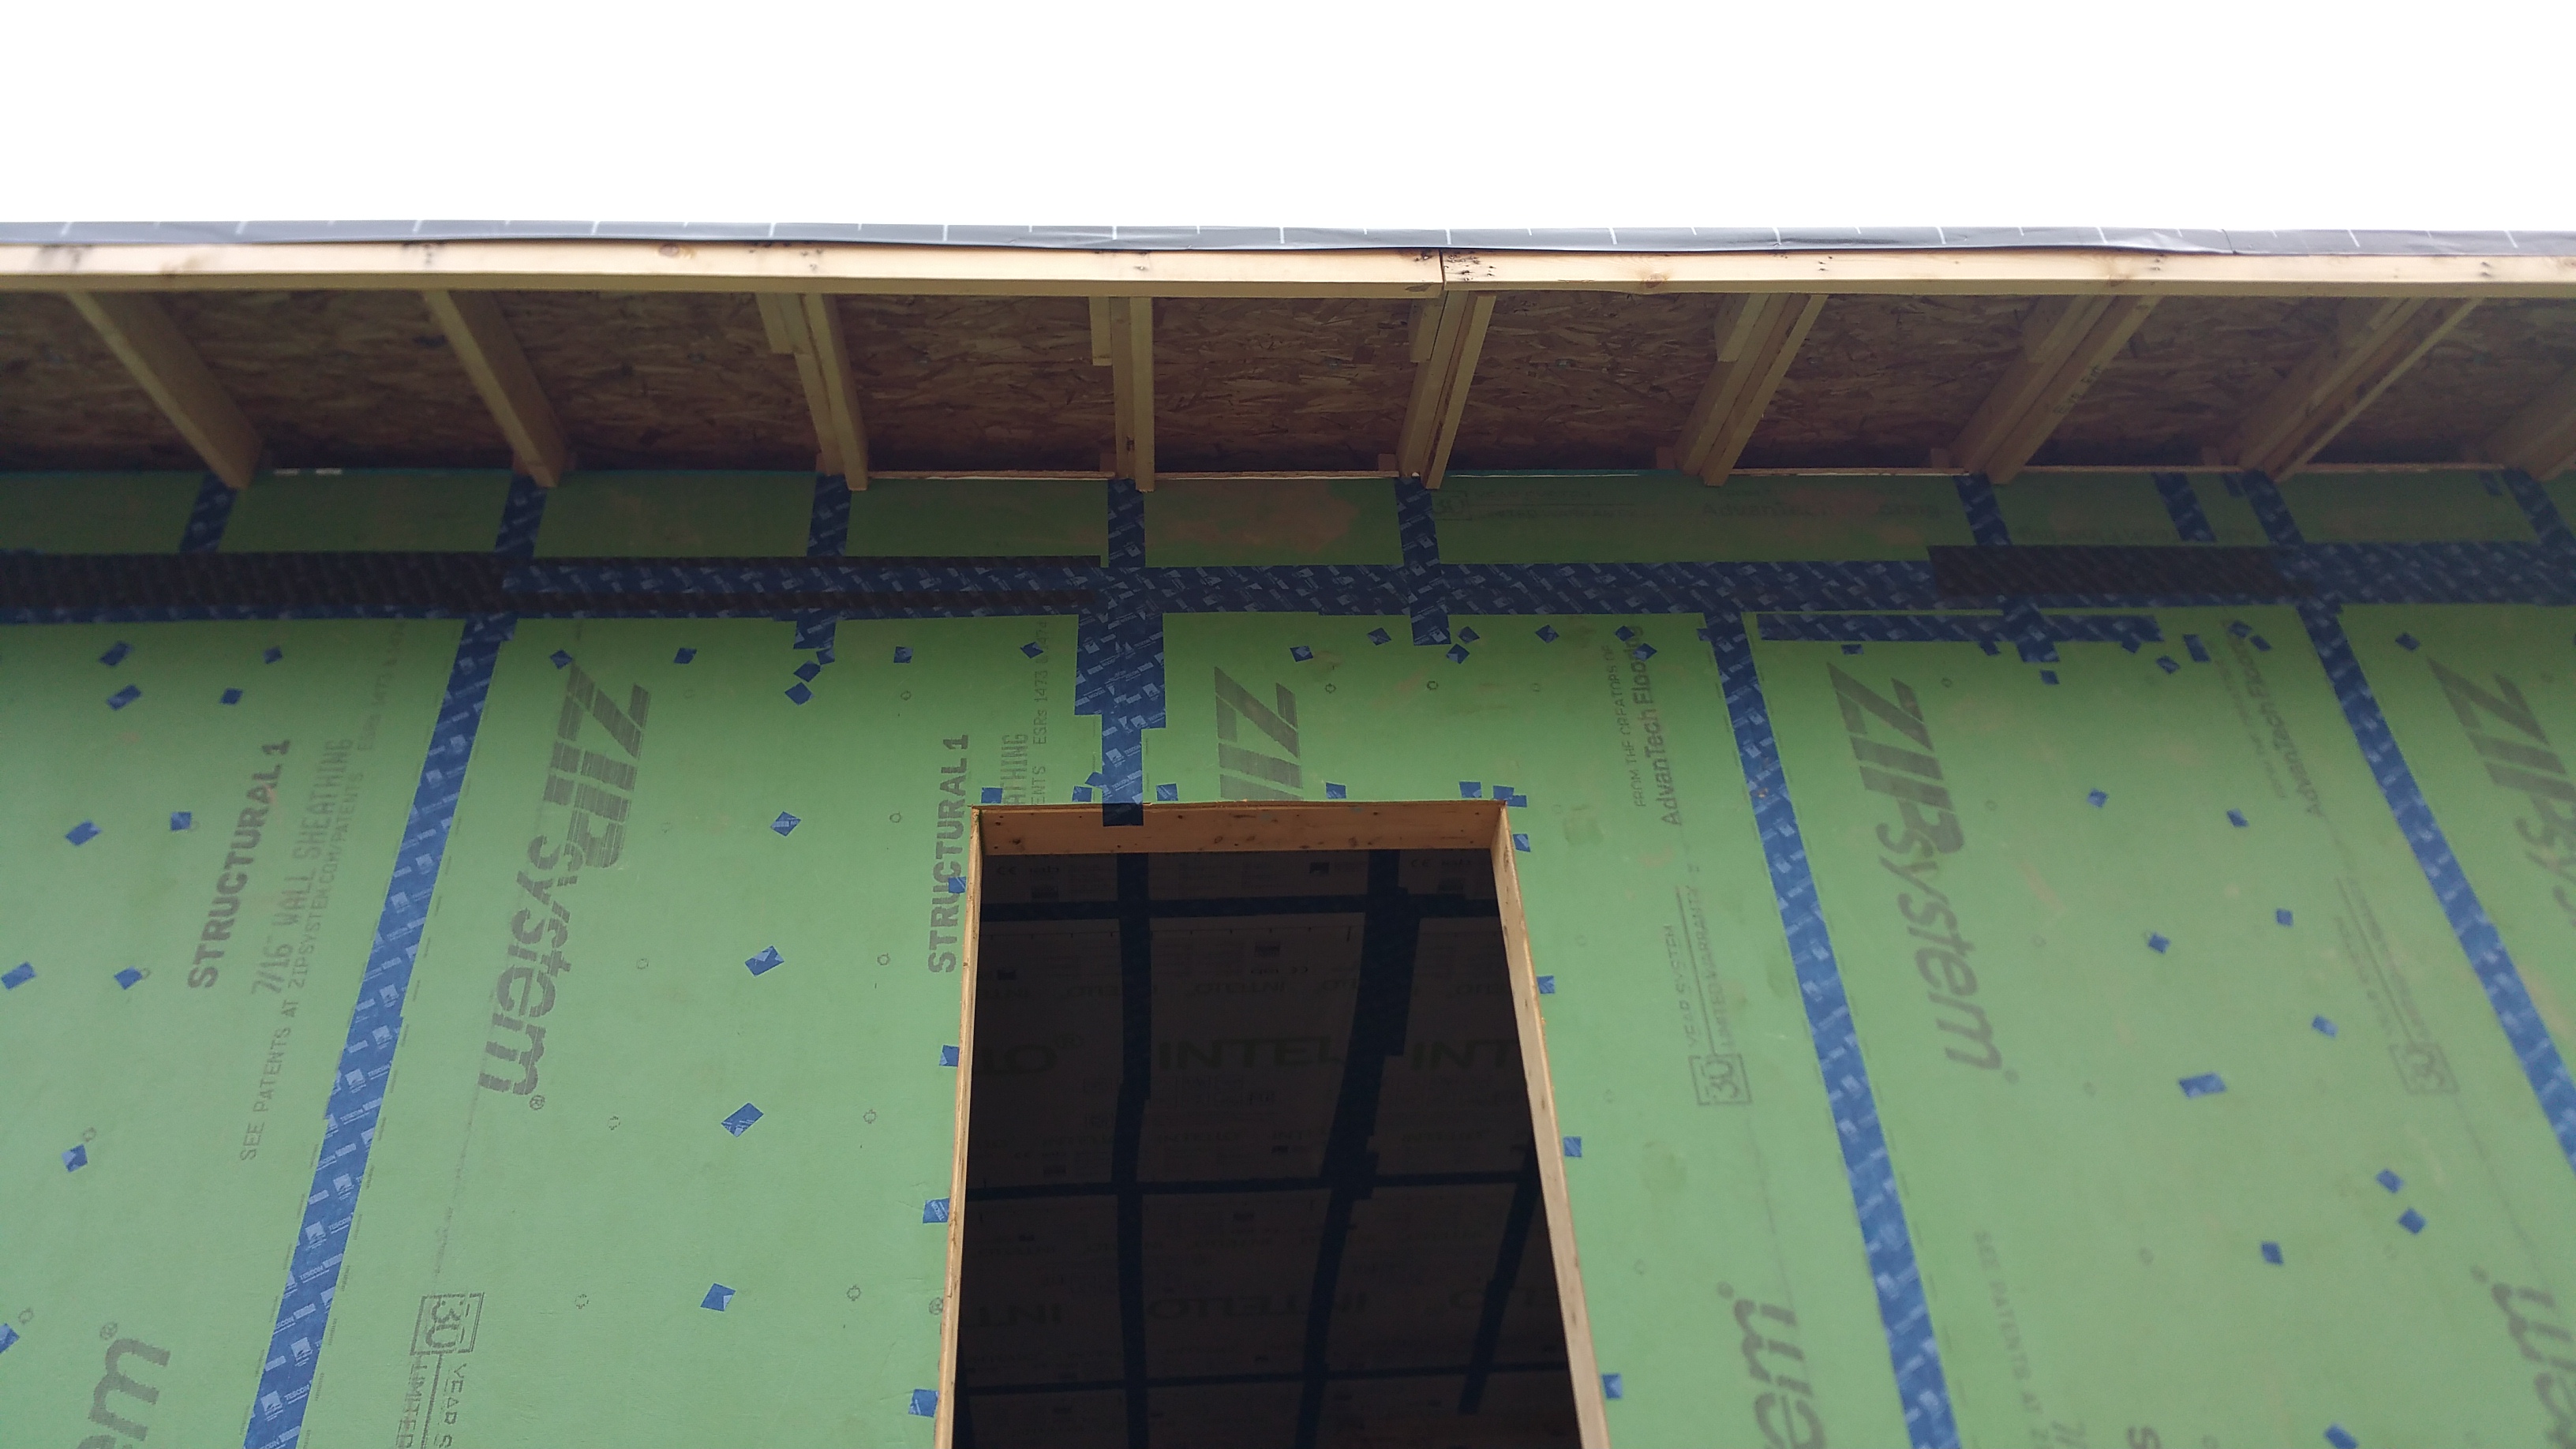 insulation chutes from outside